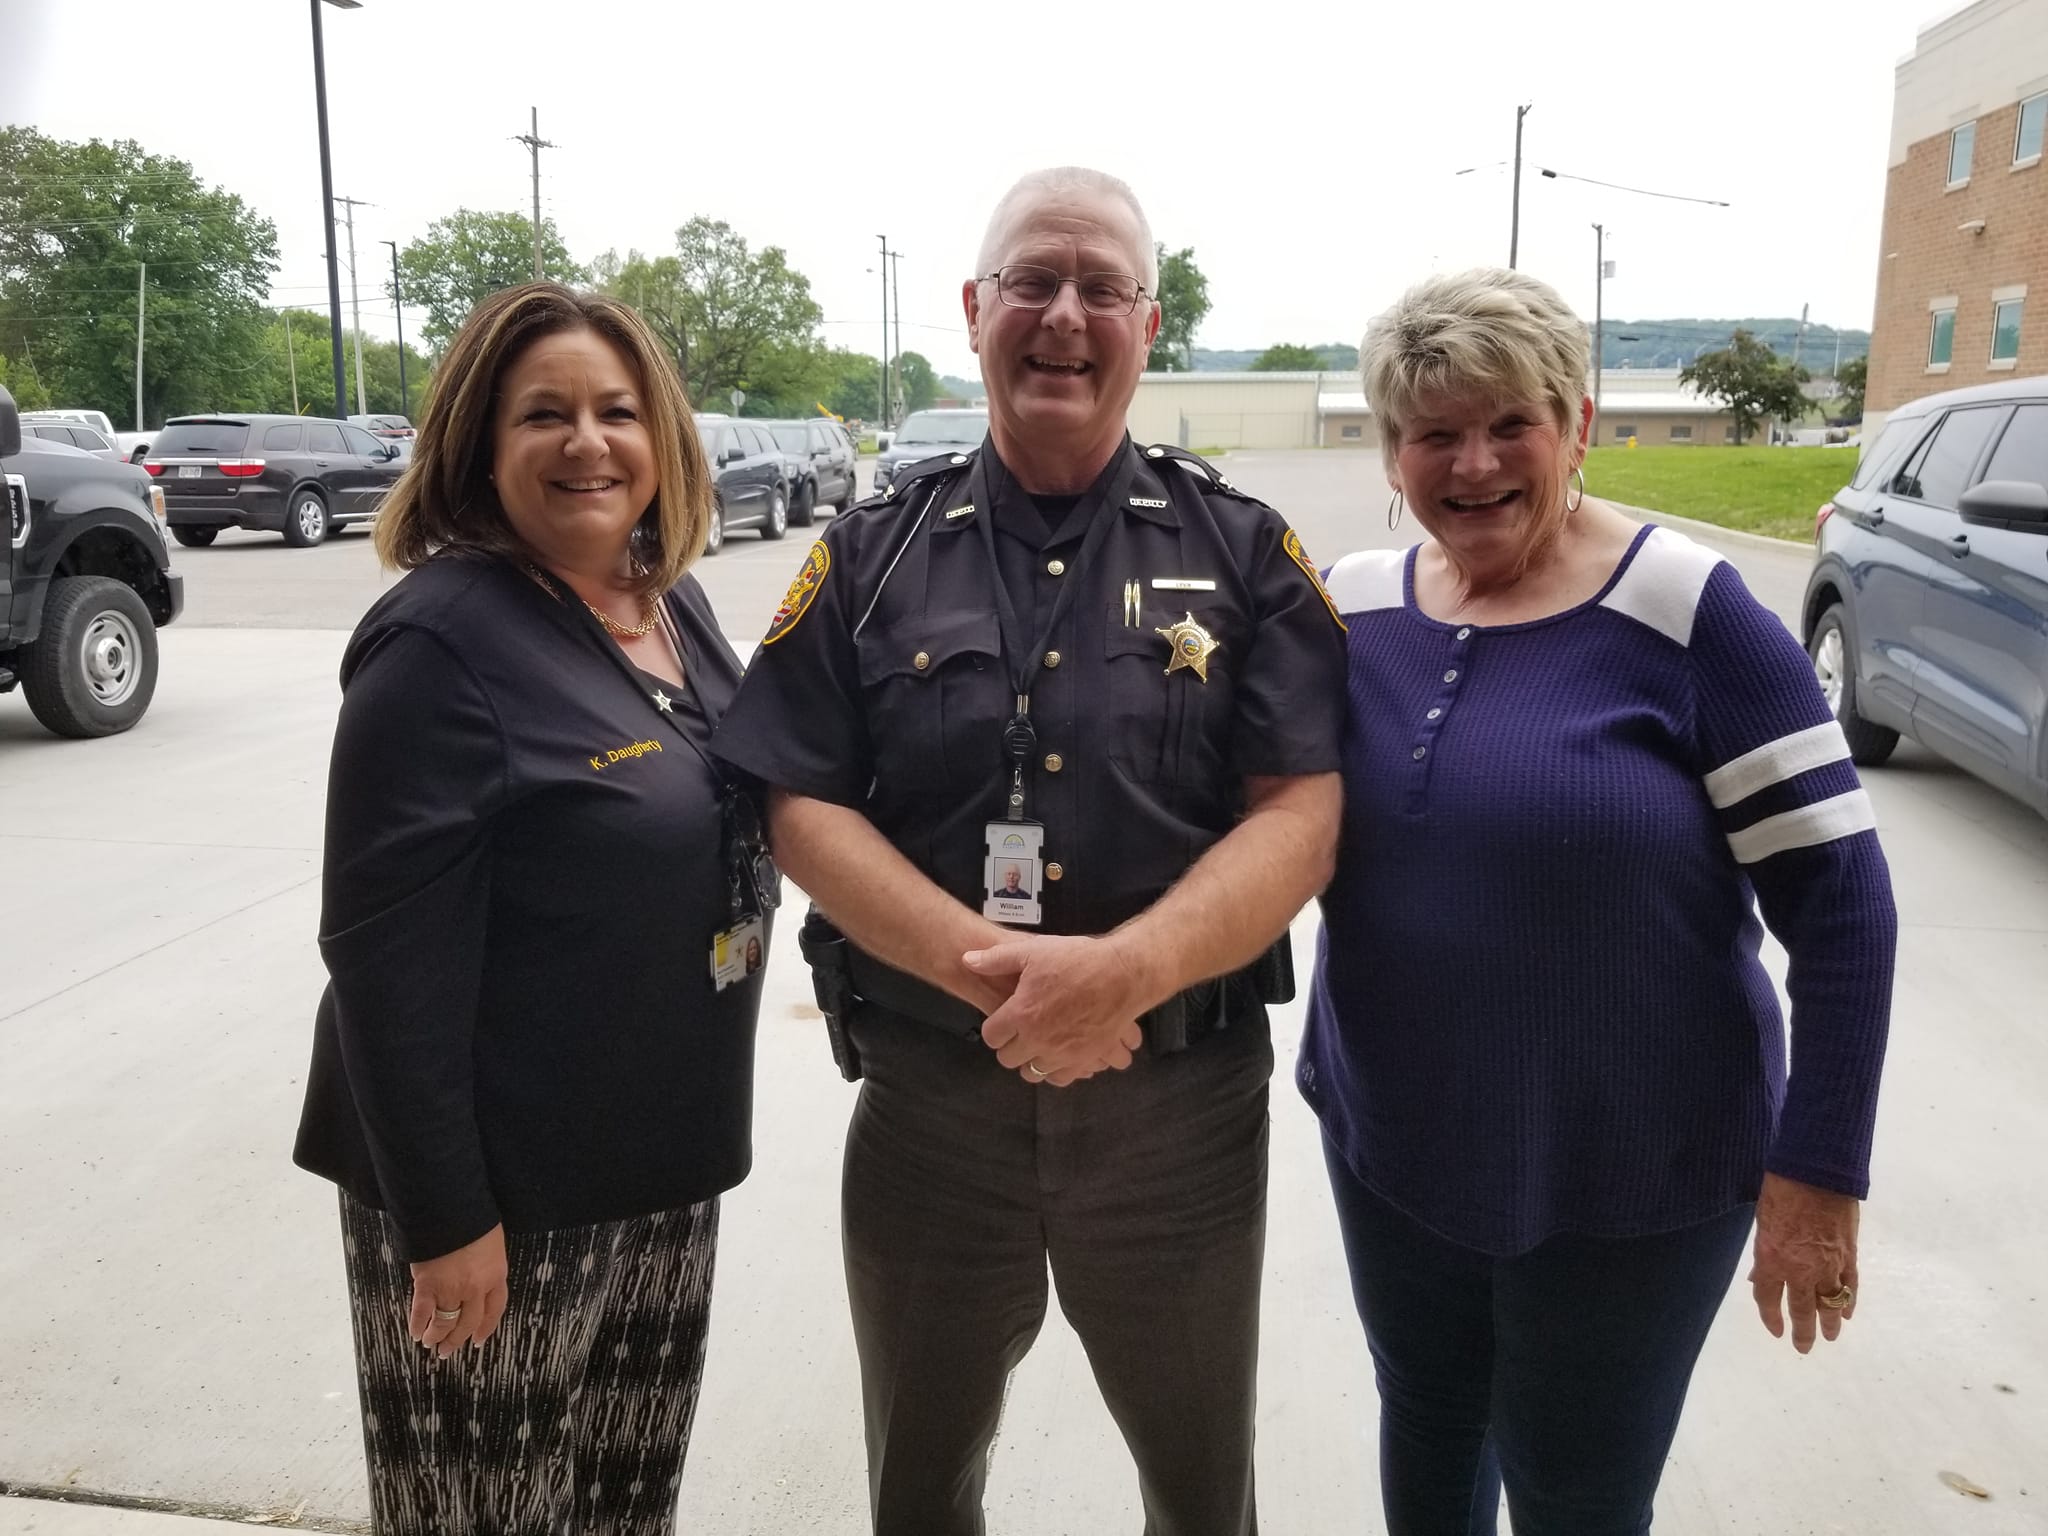 sheriff and two ladies